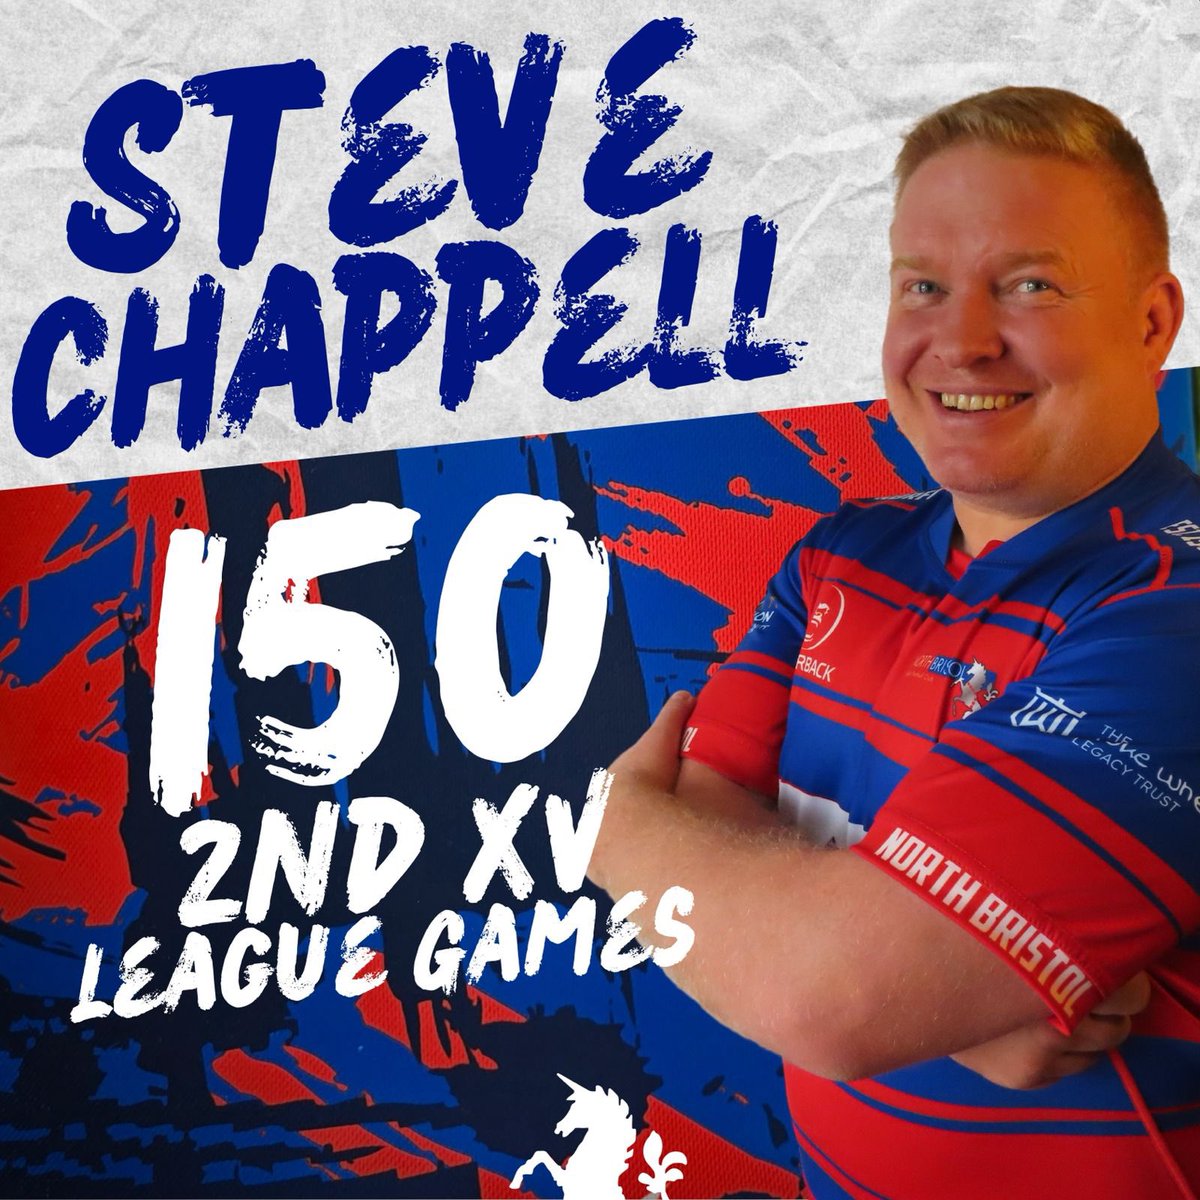 It was a great win yesterday for our Men’s 2nd XV, against Avonmouth, where Steve Chappell played his 1️⃣5️⃣0️⃣th 2nd XV League game 🗓️ Debut 20/11/99 vs Whitehall II 📈#2 in the All-Time list 1️⃣5️⃣0️⃣2nd XV League Games 1️⃣6️⃣Tries 8️⃣0️⃣Points